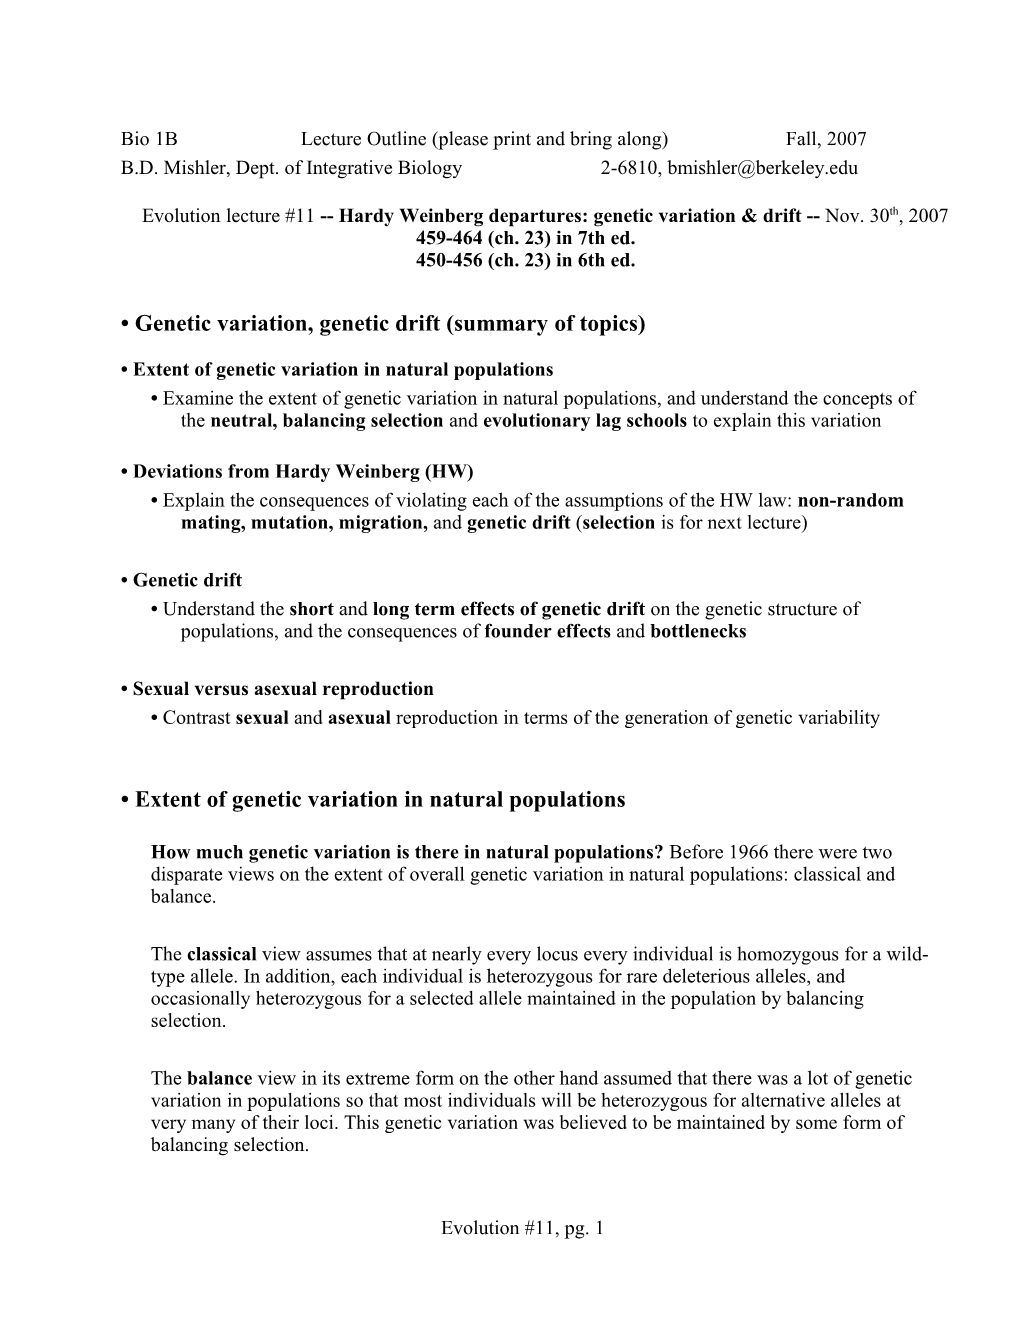 Bio 1B Lecture Outline (Please Print and Bring Along) Fall, 2007